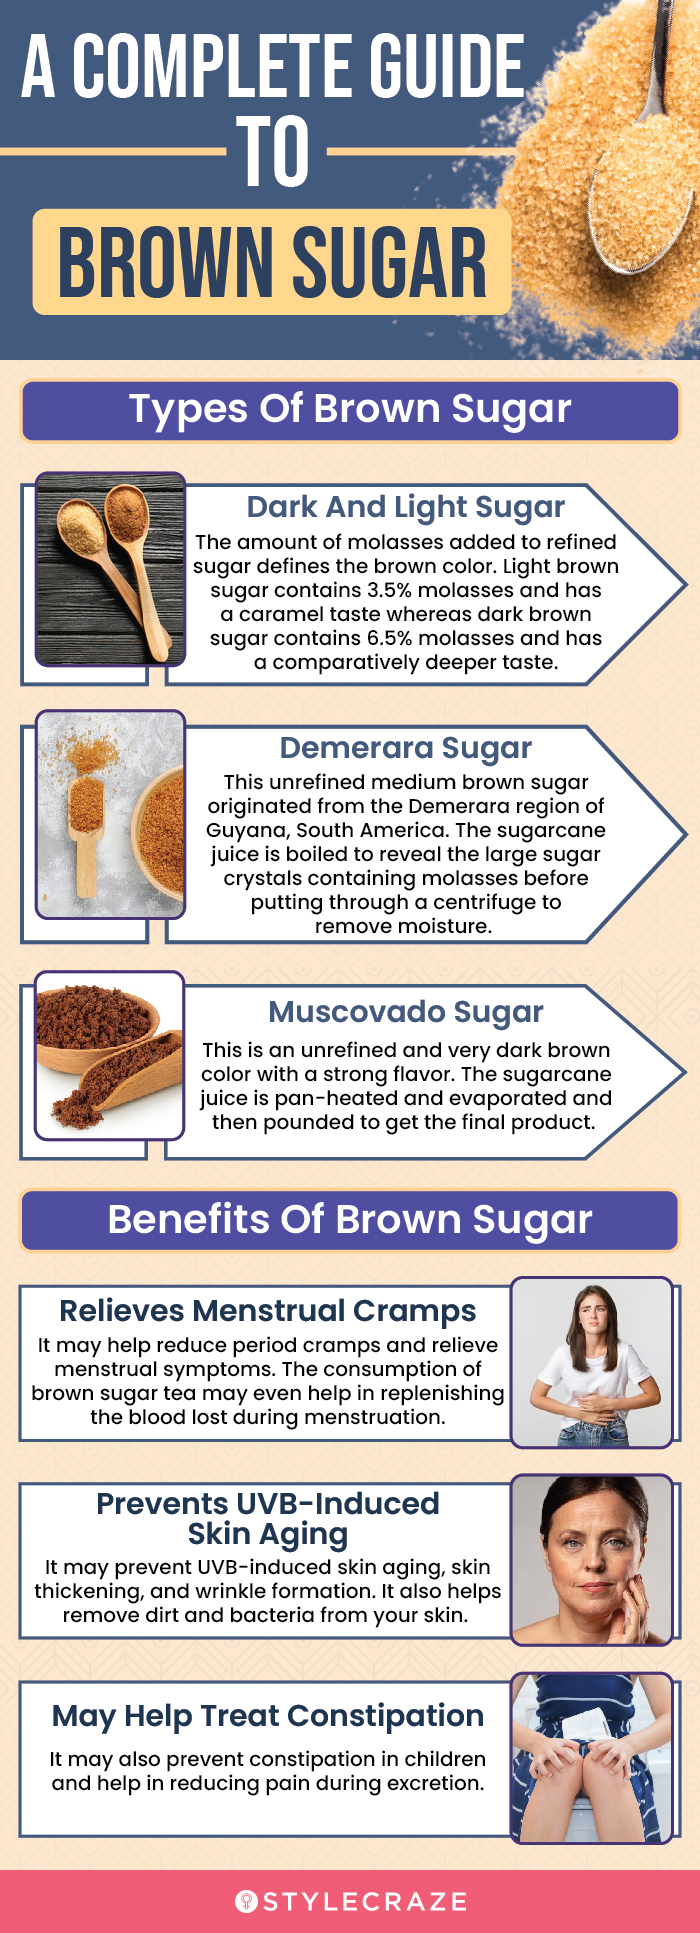 a complete guide to brown sugar (infographic)